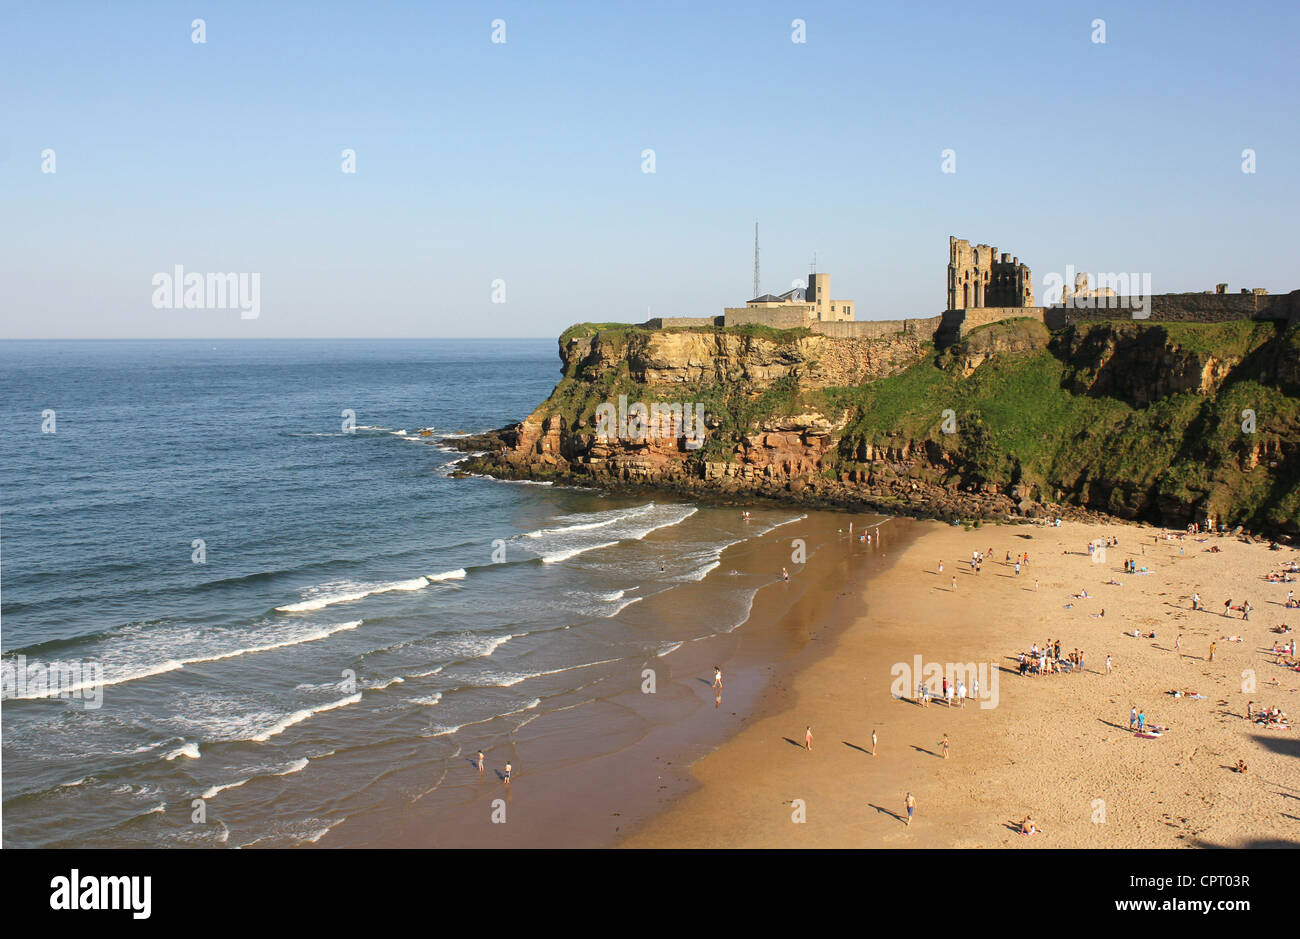 Tyneside, North East England, UK 25th May 2012 - Tynemouth view over beach towards the Spanish Battery headland and Priory. Stock Photo